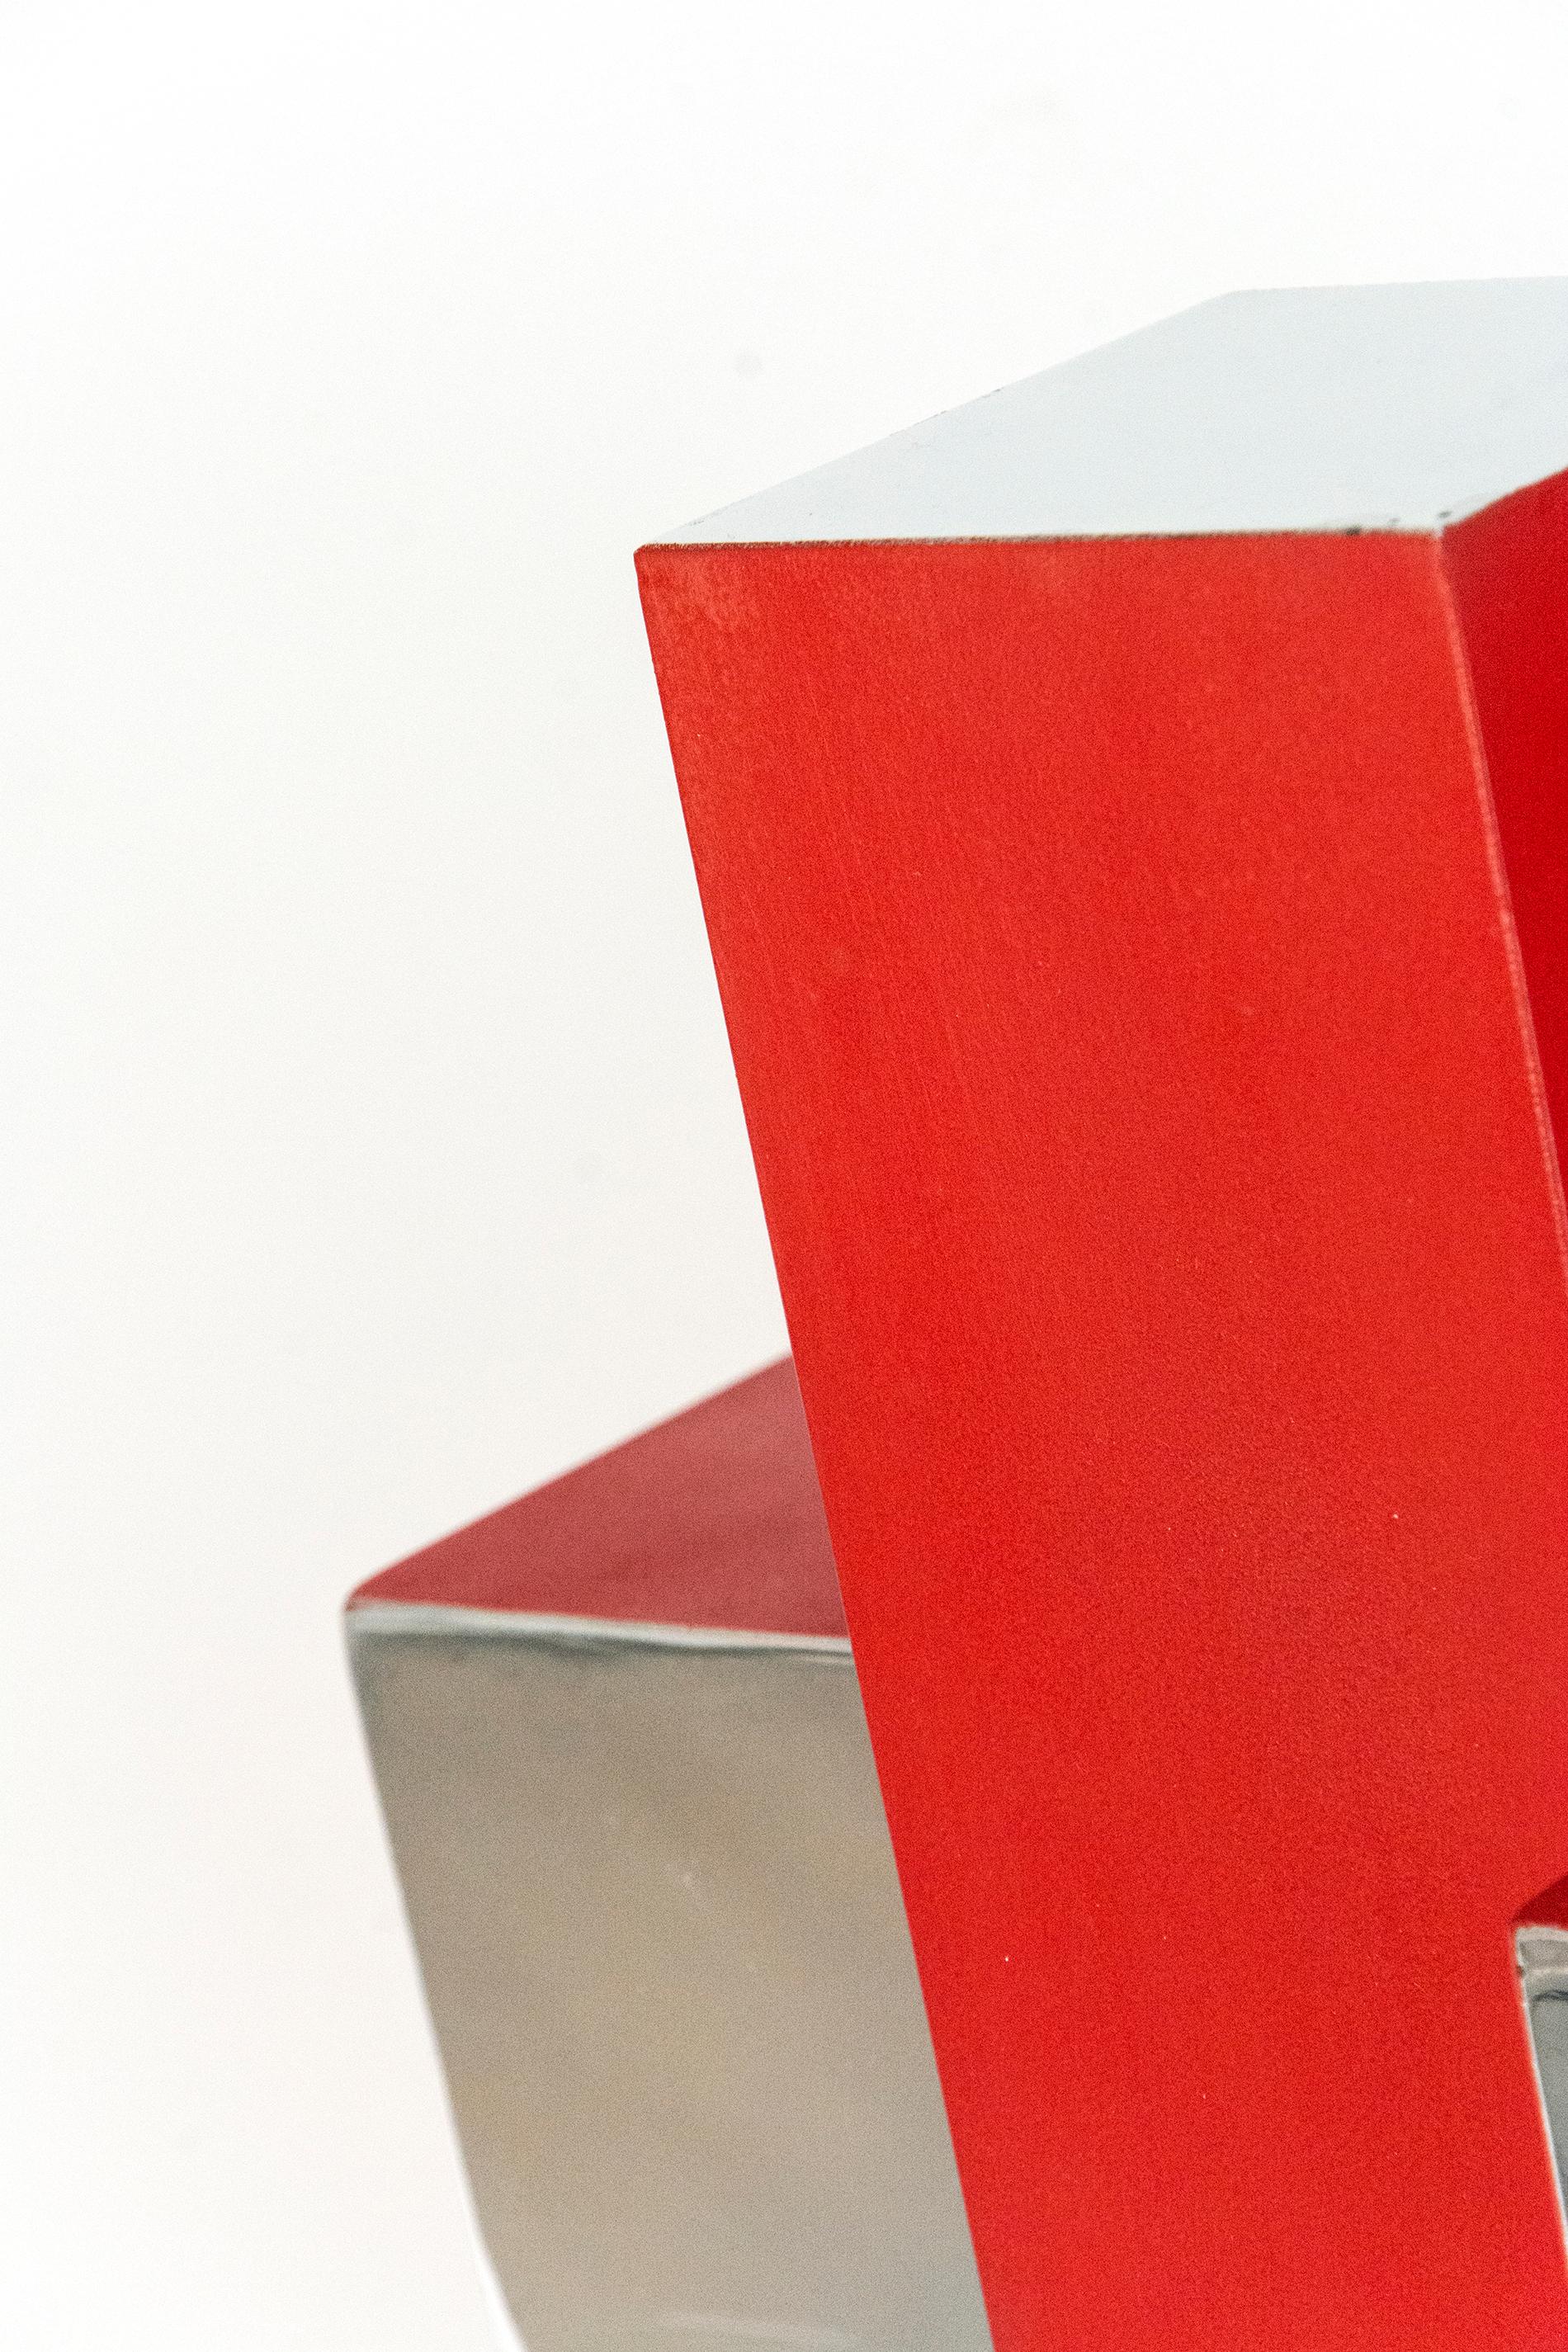 Intersecting geometry in poppy red and polished aluminum form a dynamic whole in this modern sculpture by Philippe Pallafray. This work is number 1 in an edition of 10.

Philippe Pallafray (b. 1965, France) is a member of the Sculptors Society of